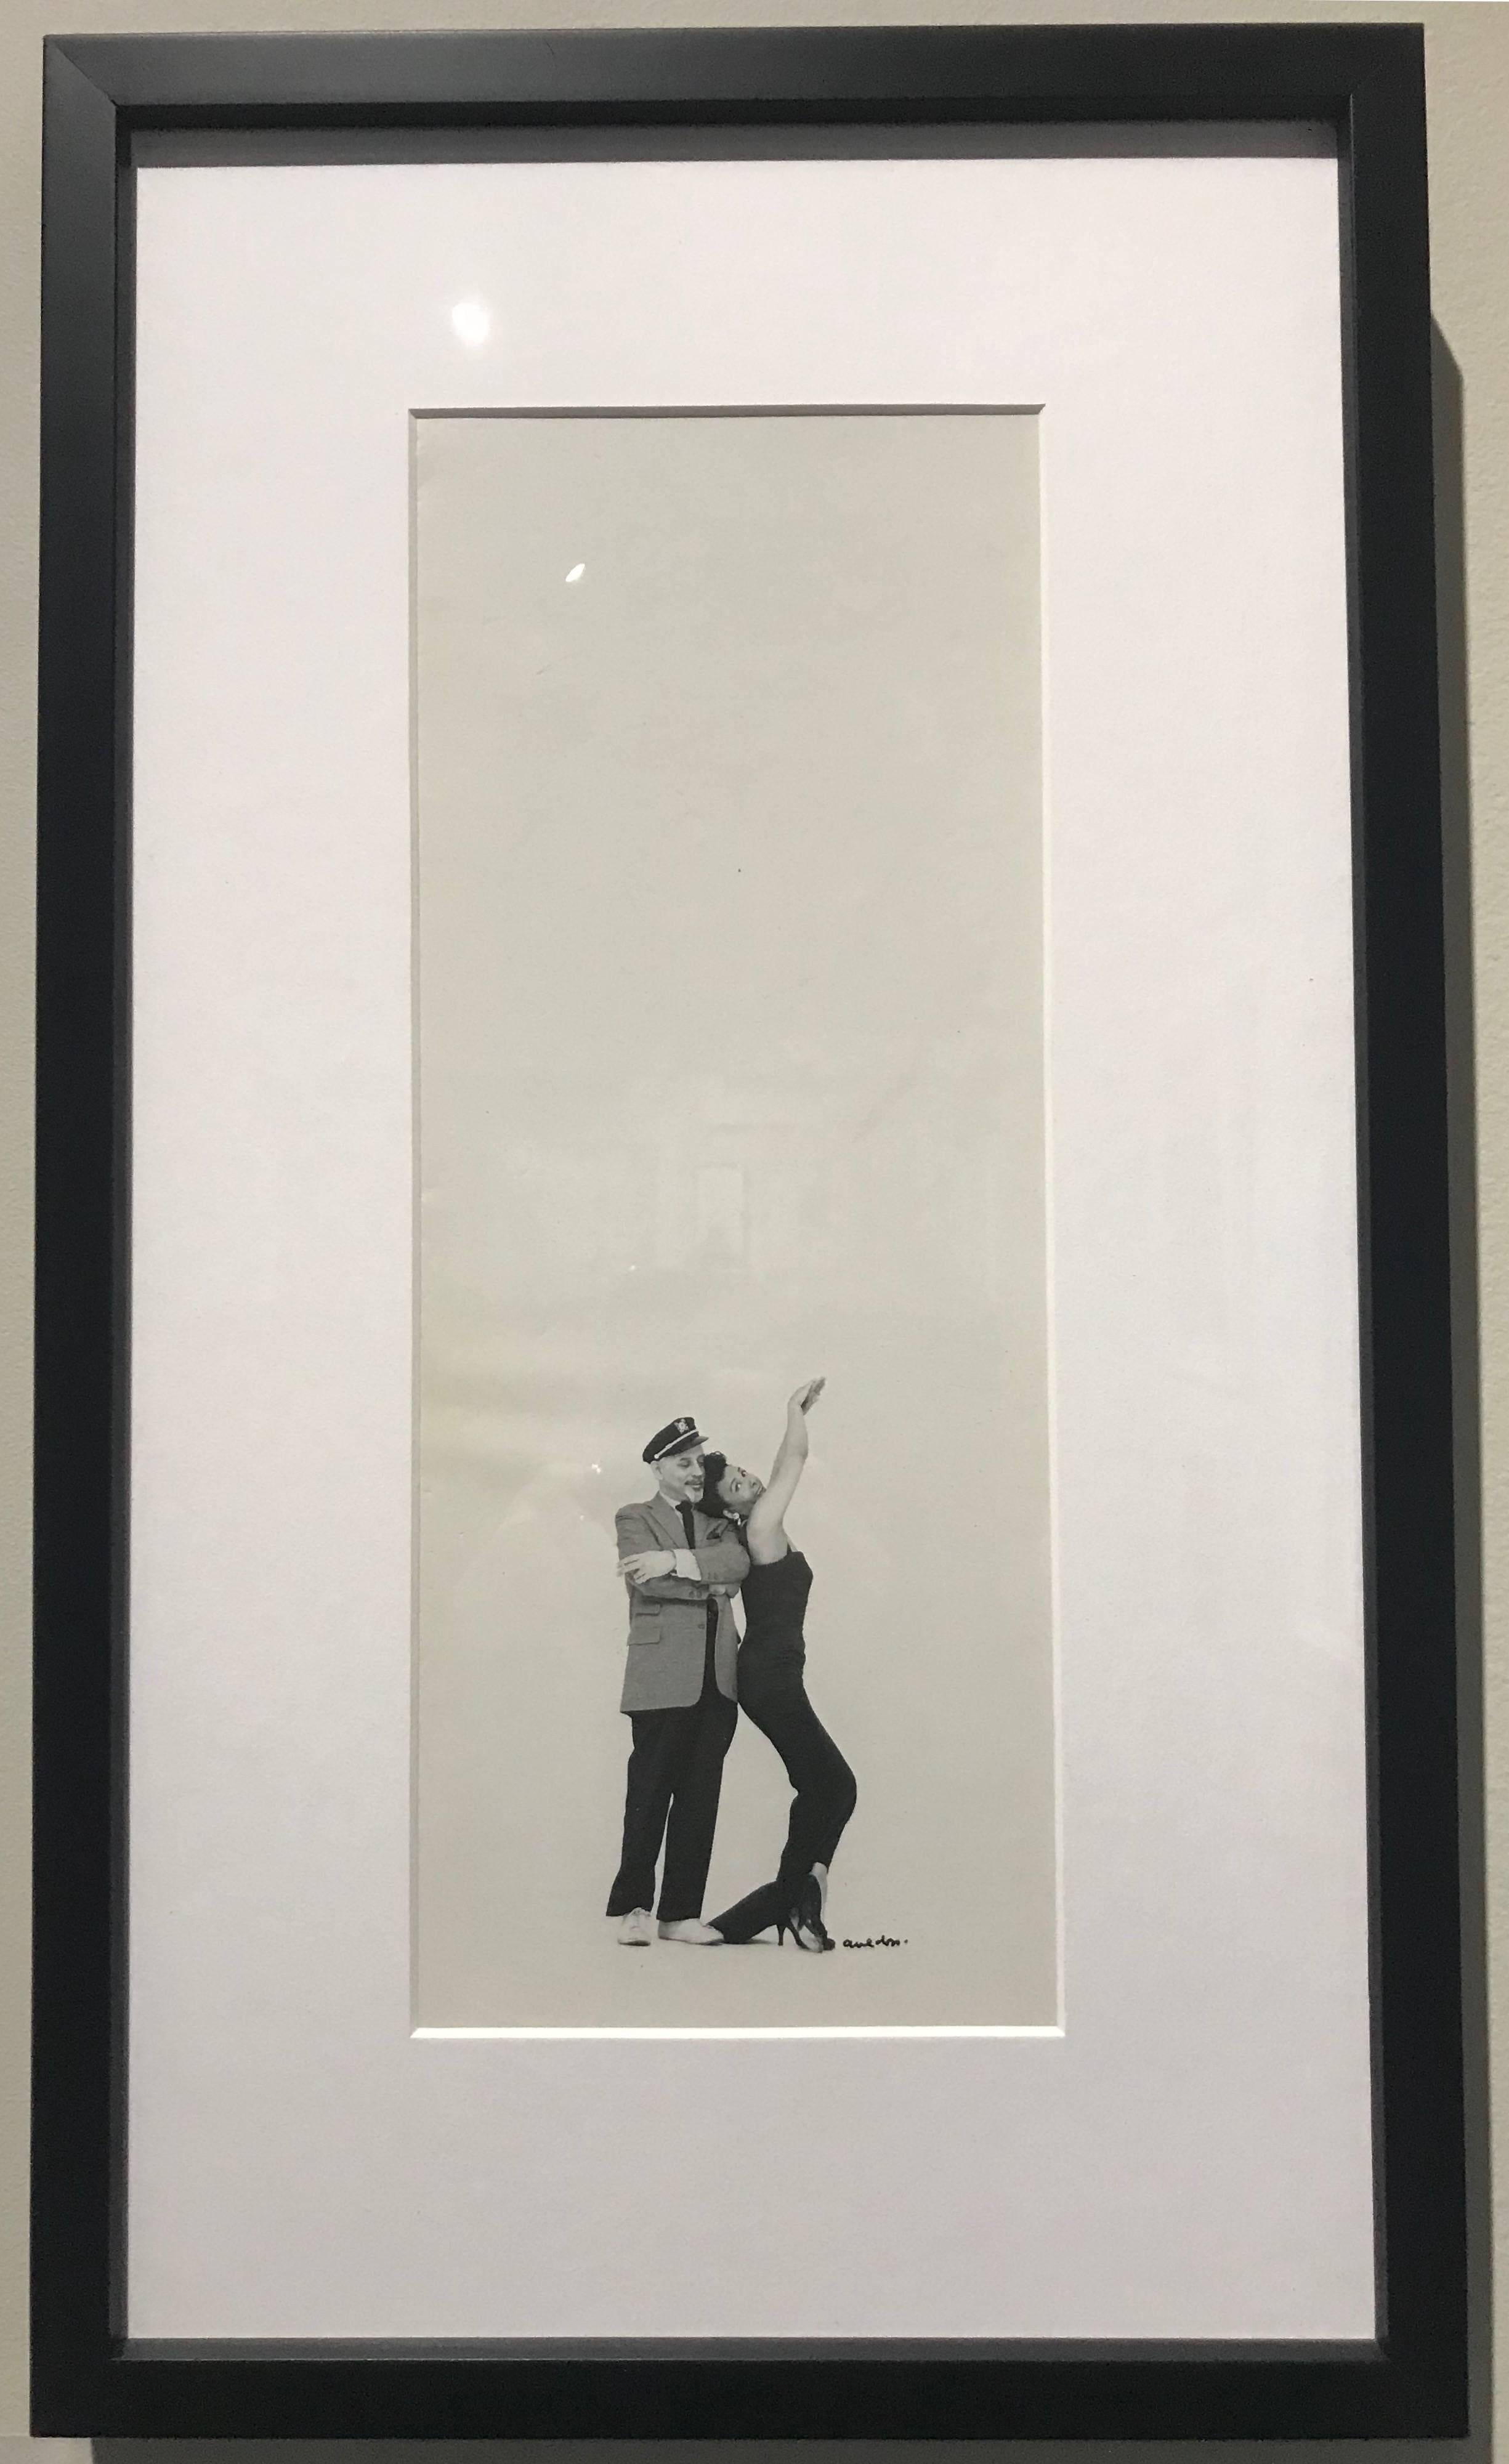 Richard Avedon Black and White Photograph - VINTAGE MID CENTURYlena horne and lennie halfton OWNED BY HILARY KNIGHT